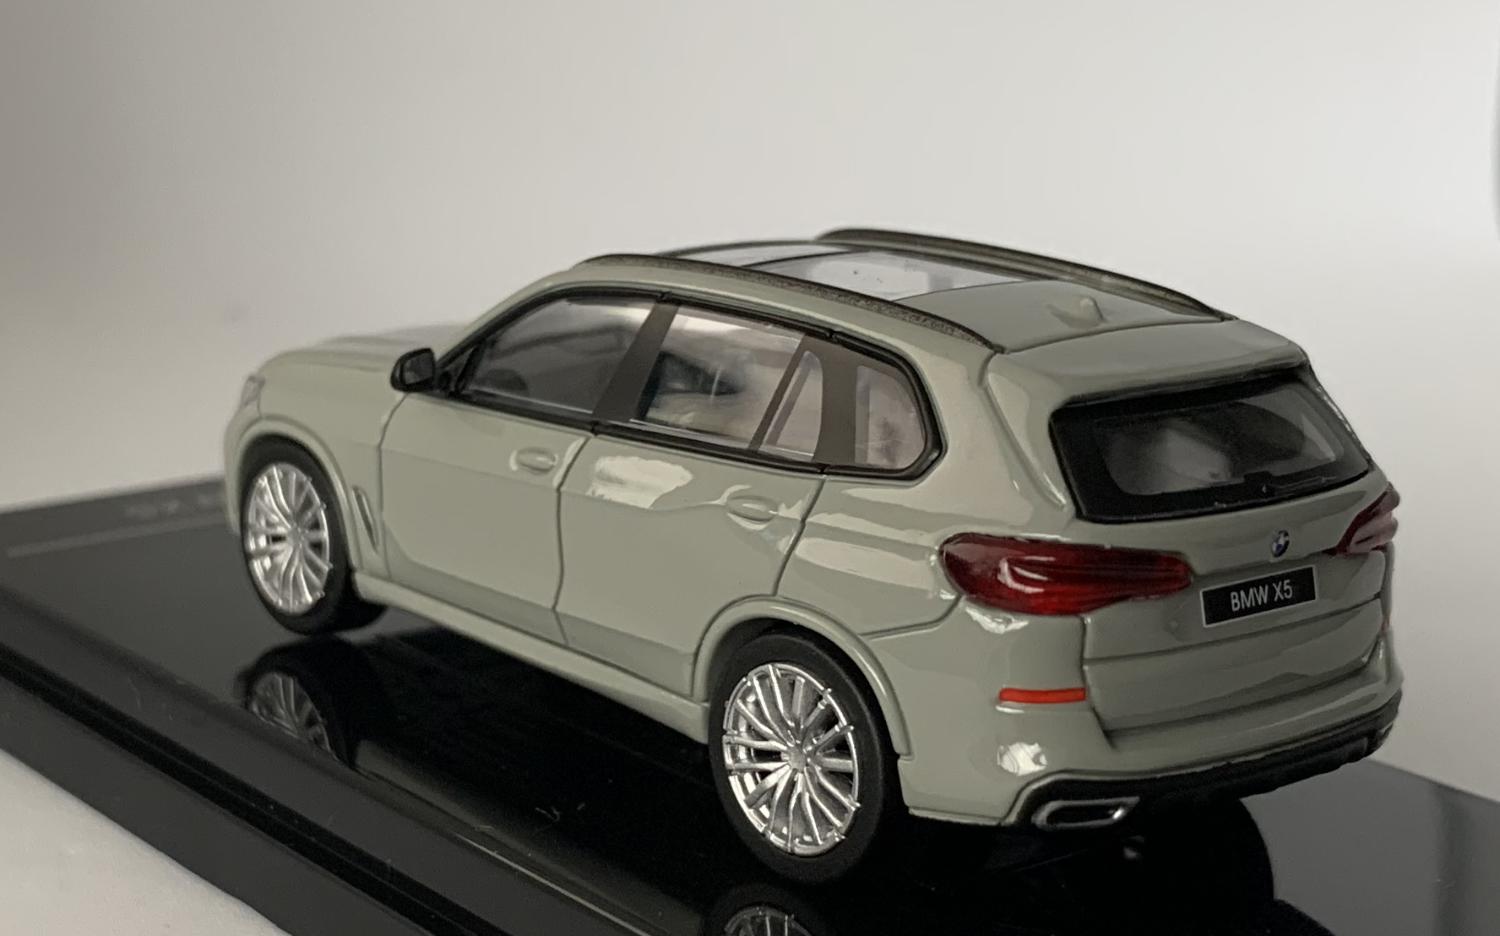 An excellent scale model of a BMW X5 decorated in nardo grey with panoramic roof